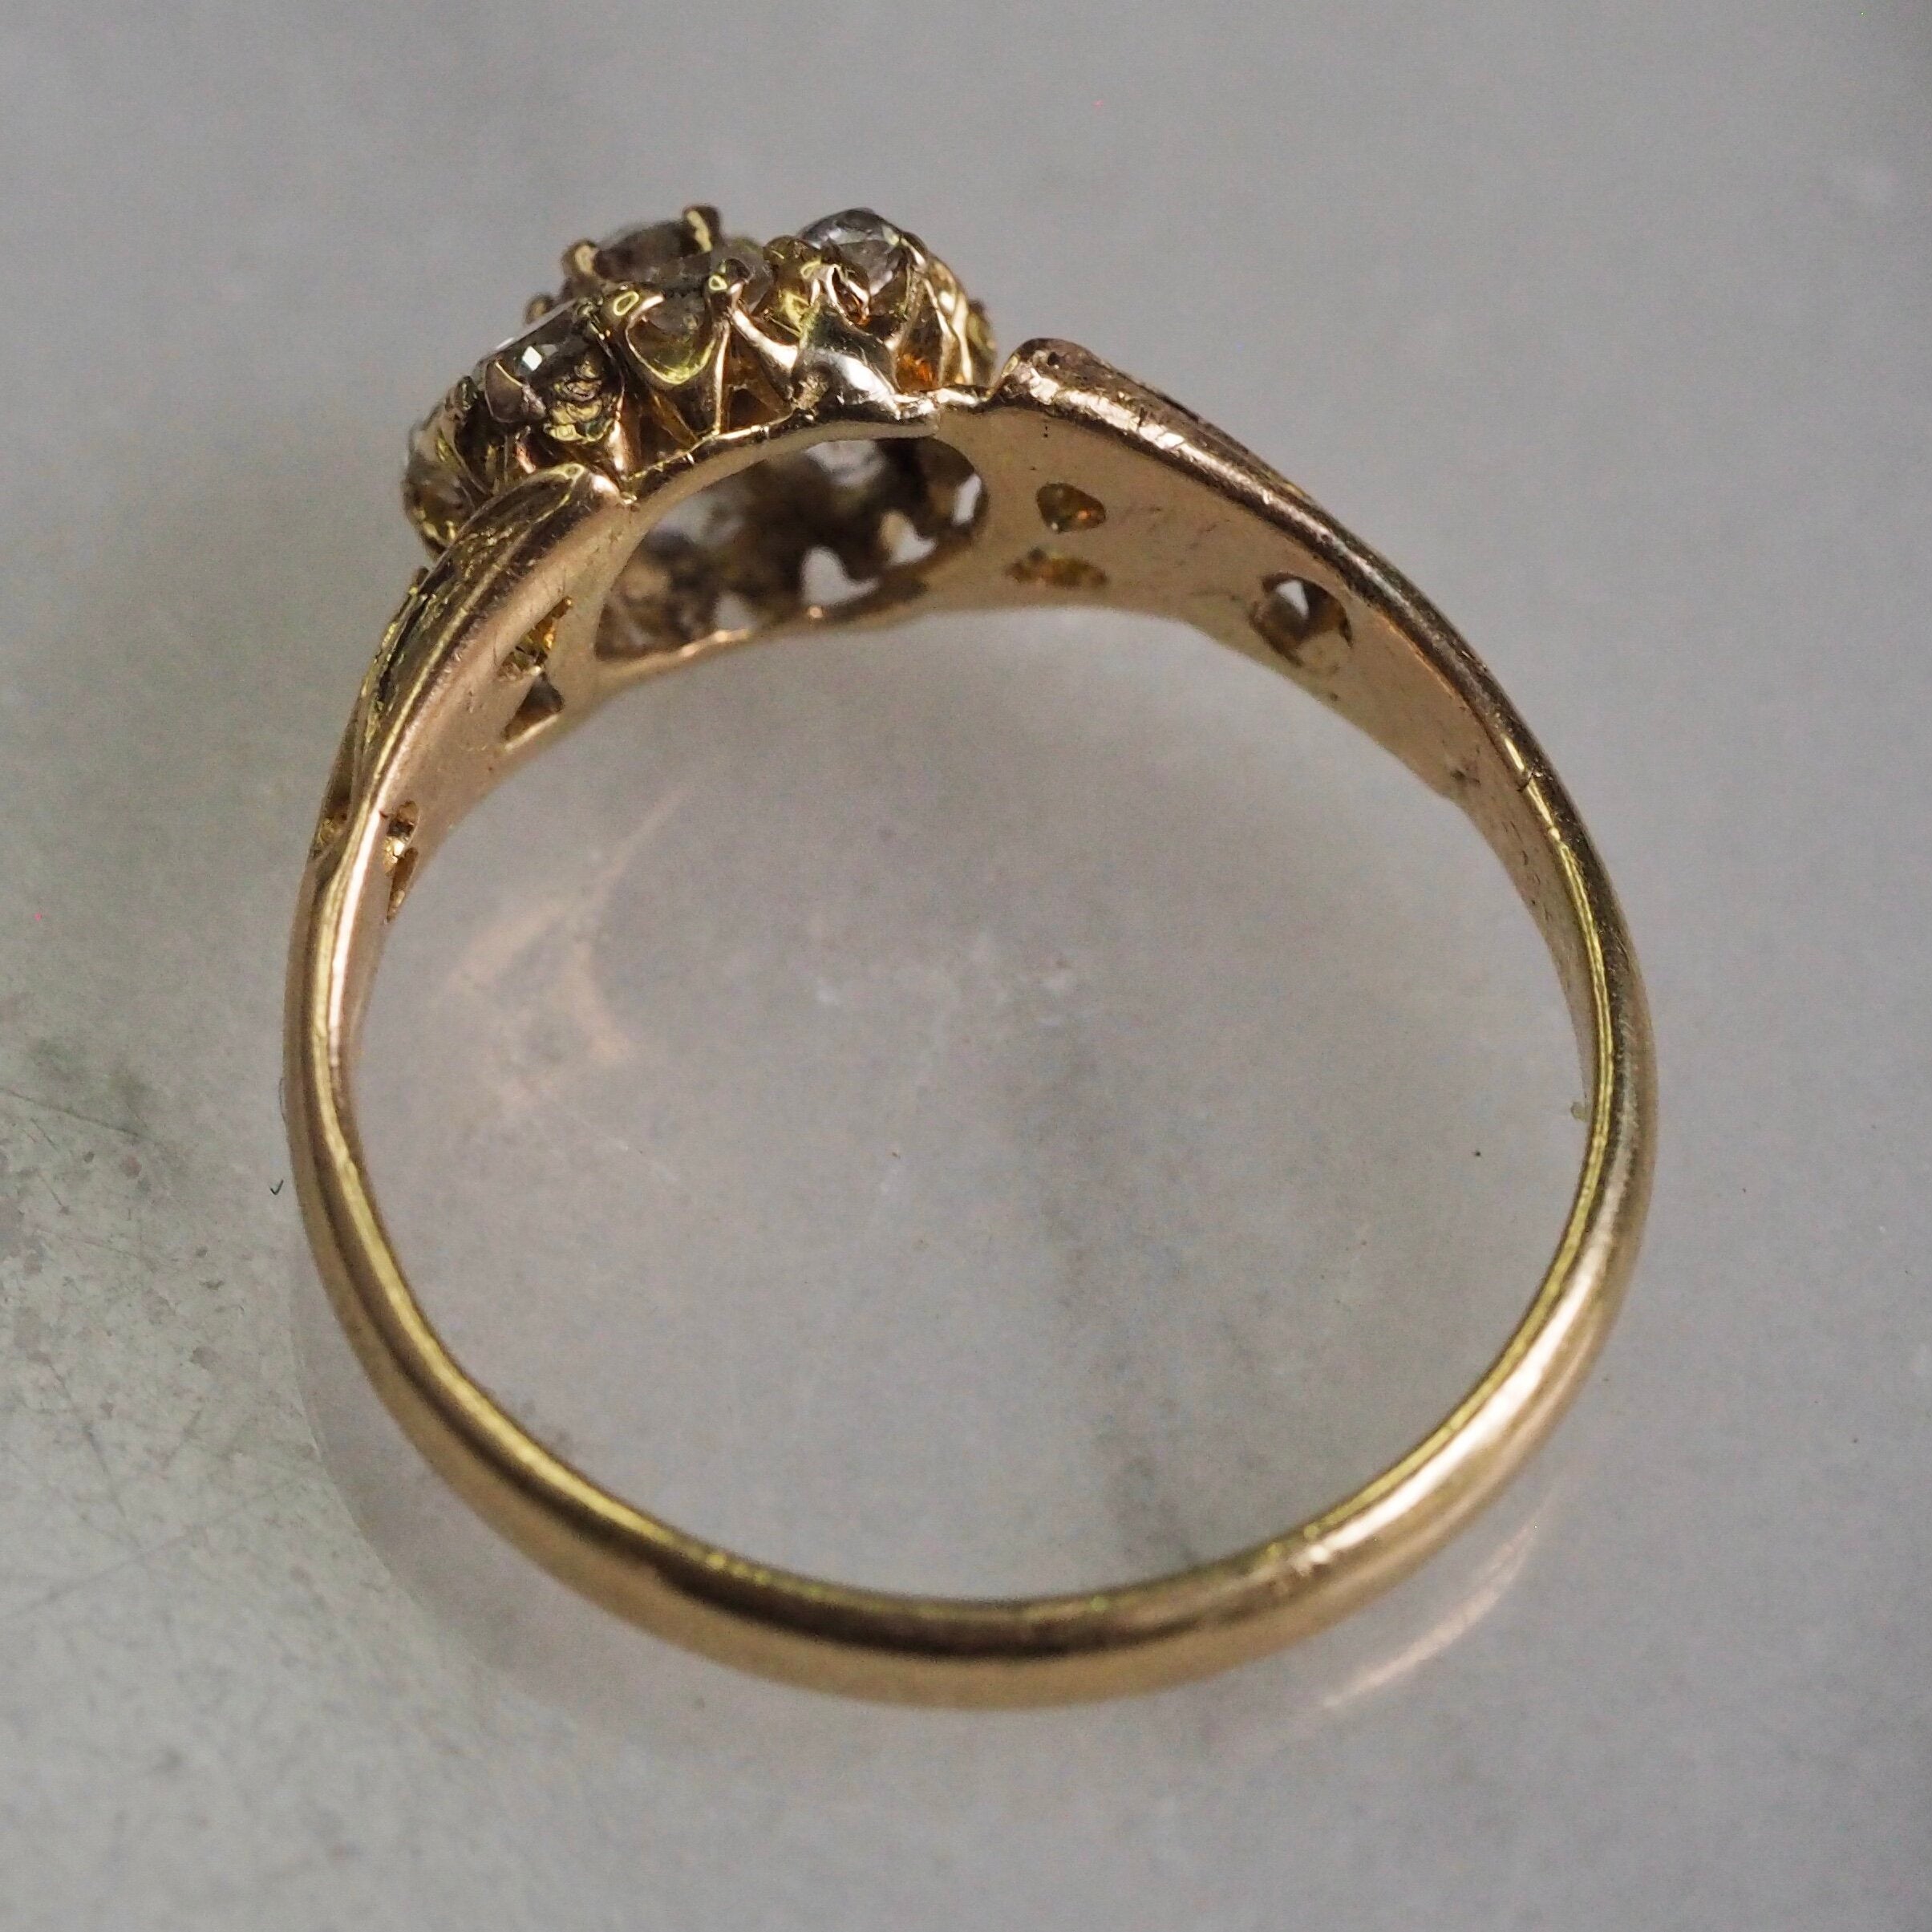 Antique Early Victorian c. 1840 15k Gold Old Mine Cut Diamond Cluster Ring